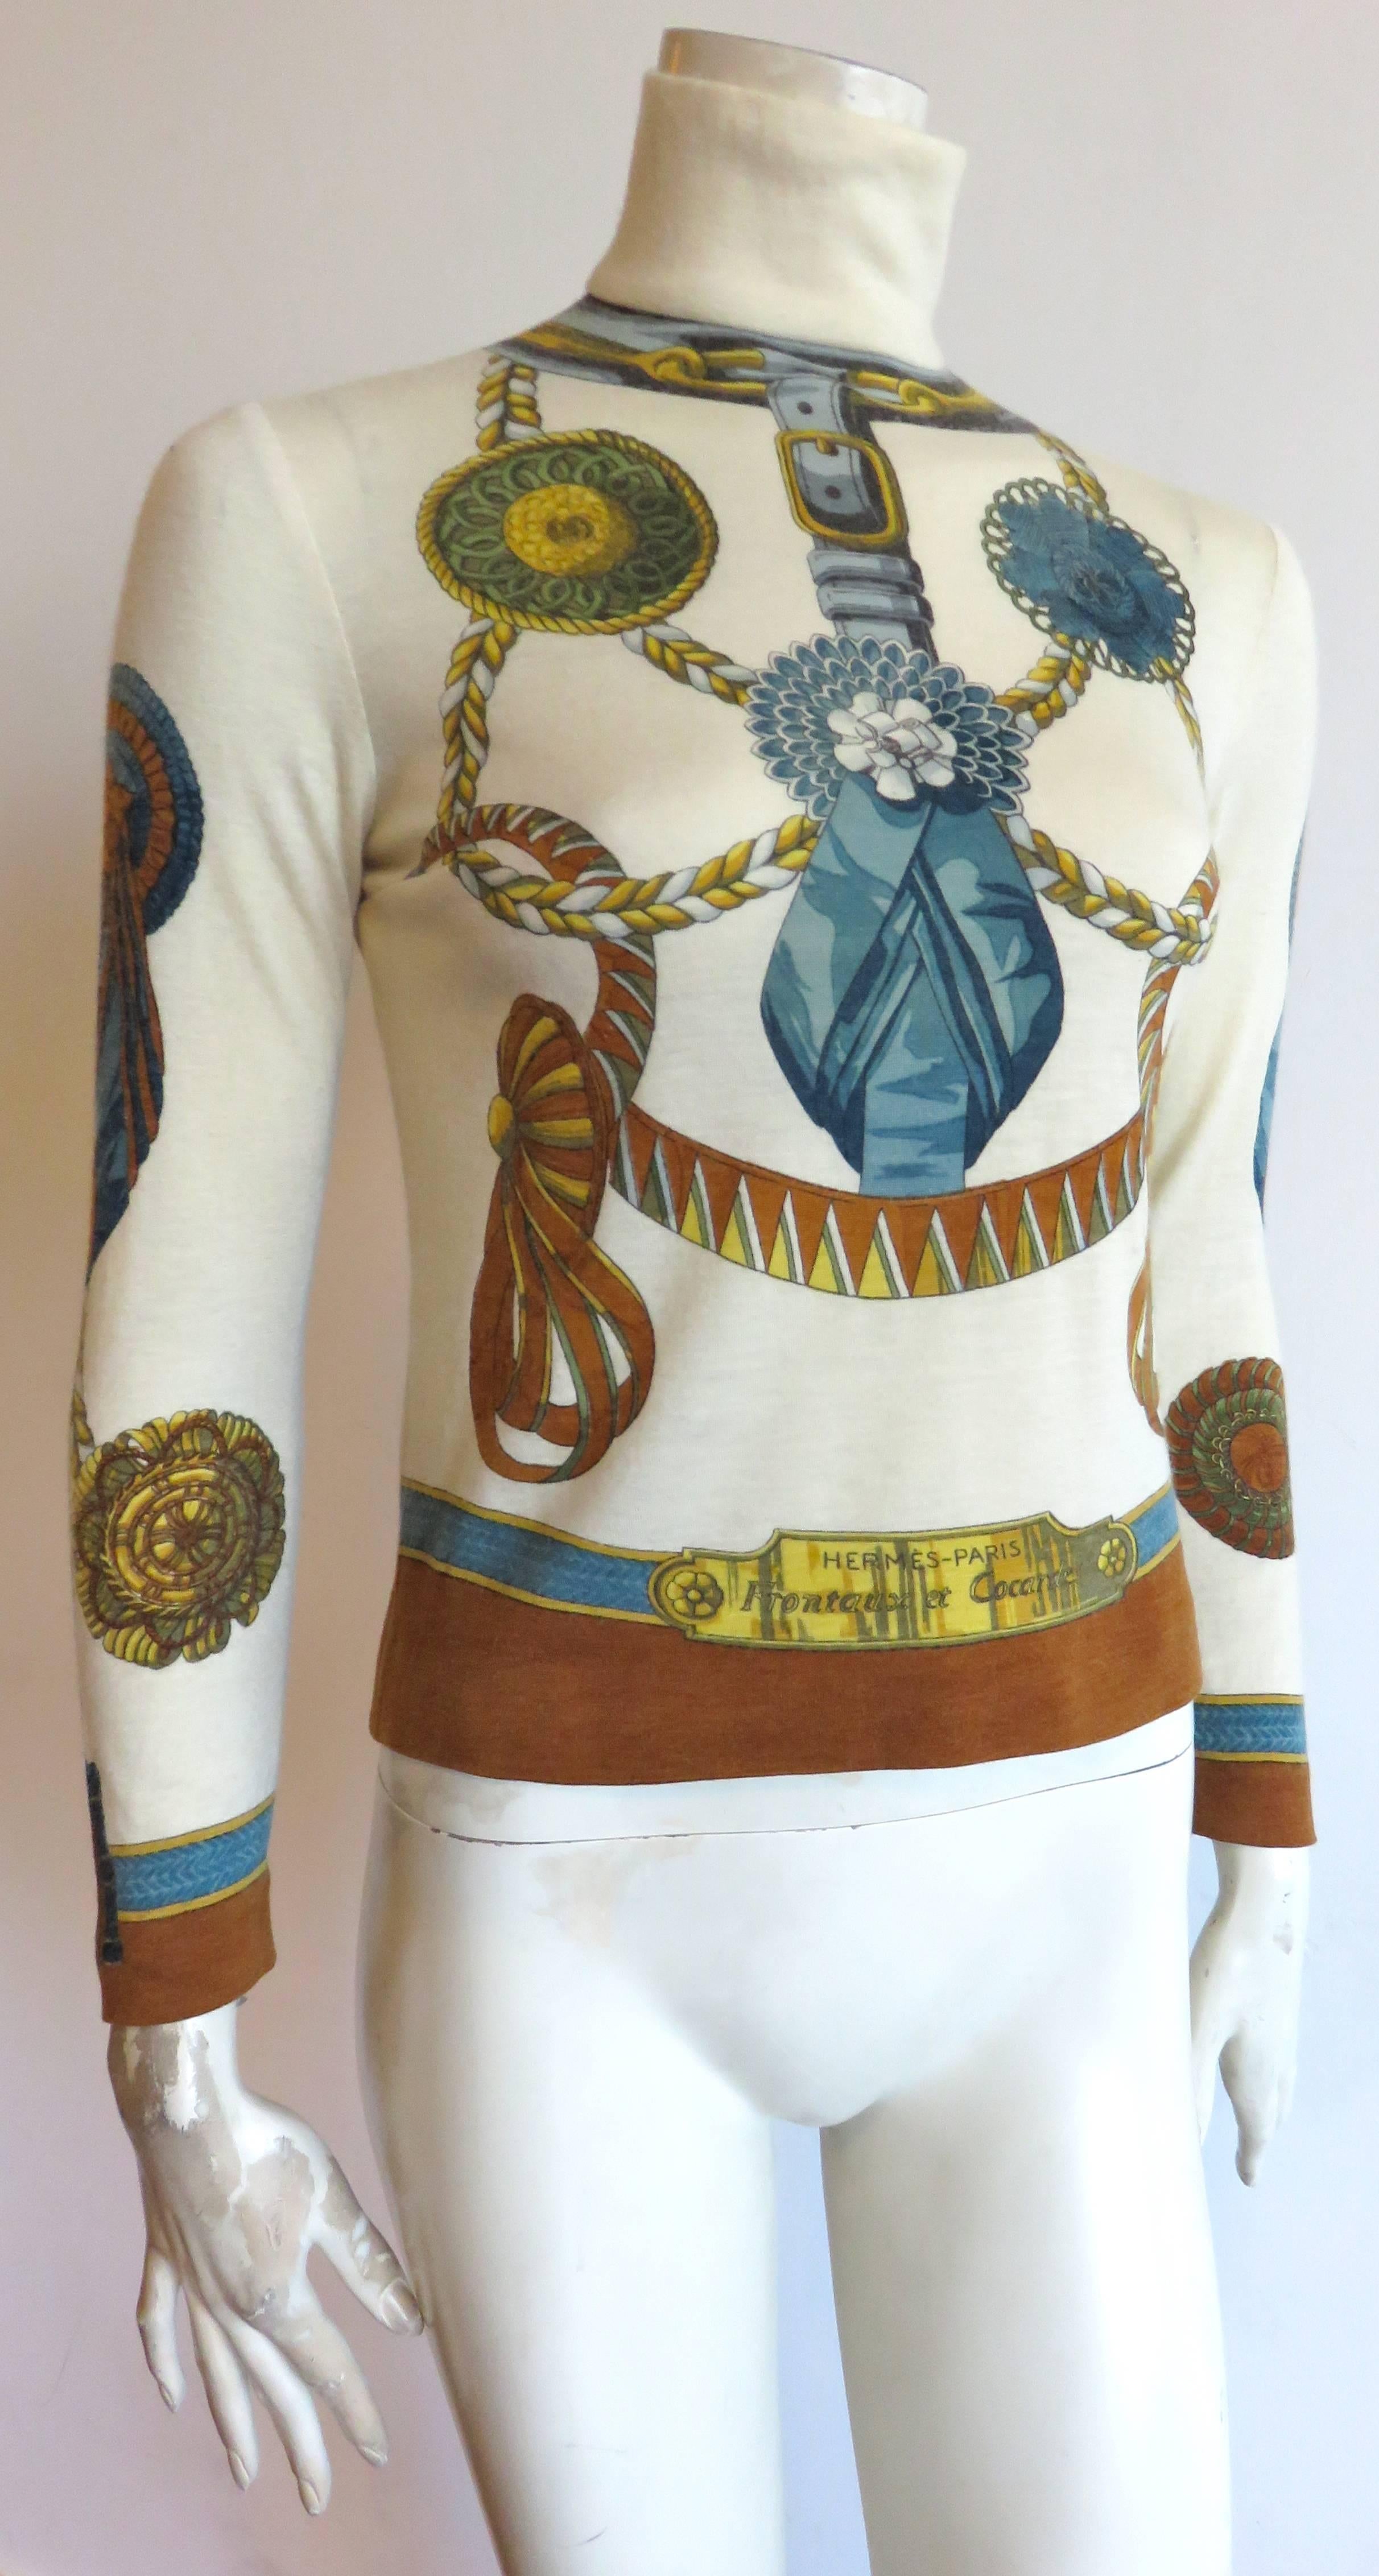 1980's HERMES PARIS Trompe l'oeil cashmere sweater.

Very soft, turtle-neck sweater featuring trompe l'oeil artwork decorations at front, back, and sleeves.

Prominent, 'Hermes' engraved, trompe l'oeil plates at front and back.

Center-back